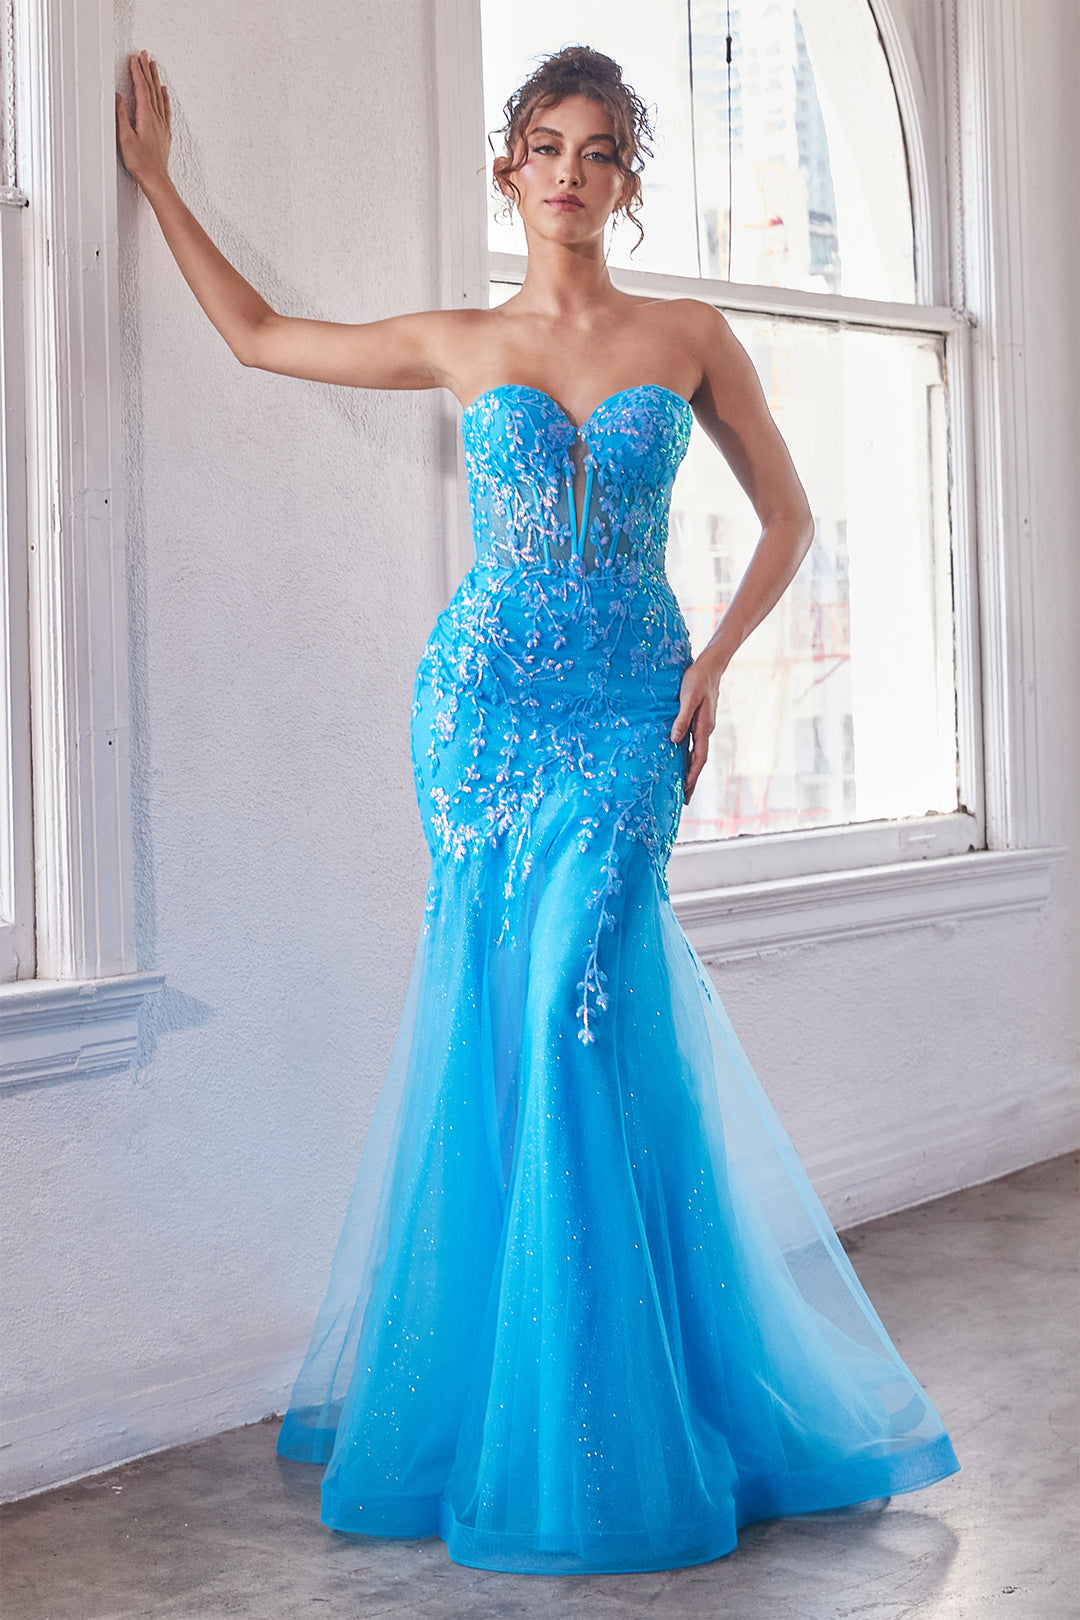 Sequin Tulle Strapless Mermaid Dress by Ladivine CB139